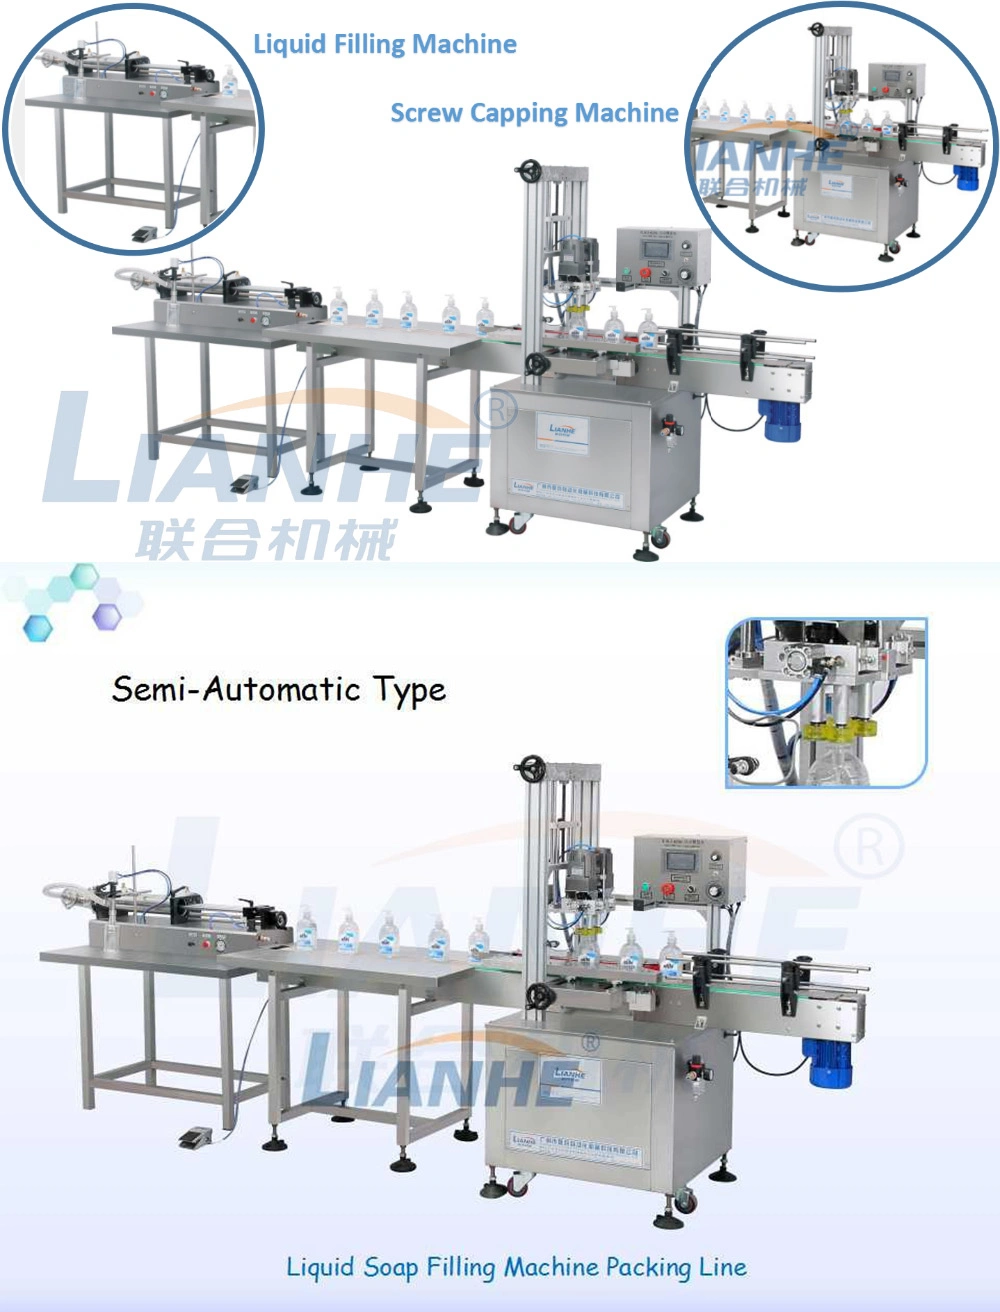 Liquid Soap Filling Machine Bottle Filling and Capping Machine